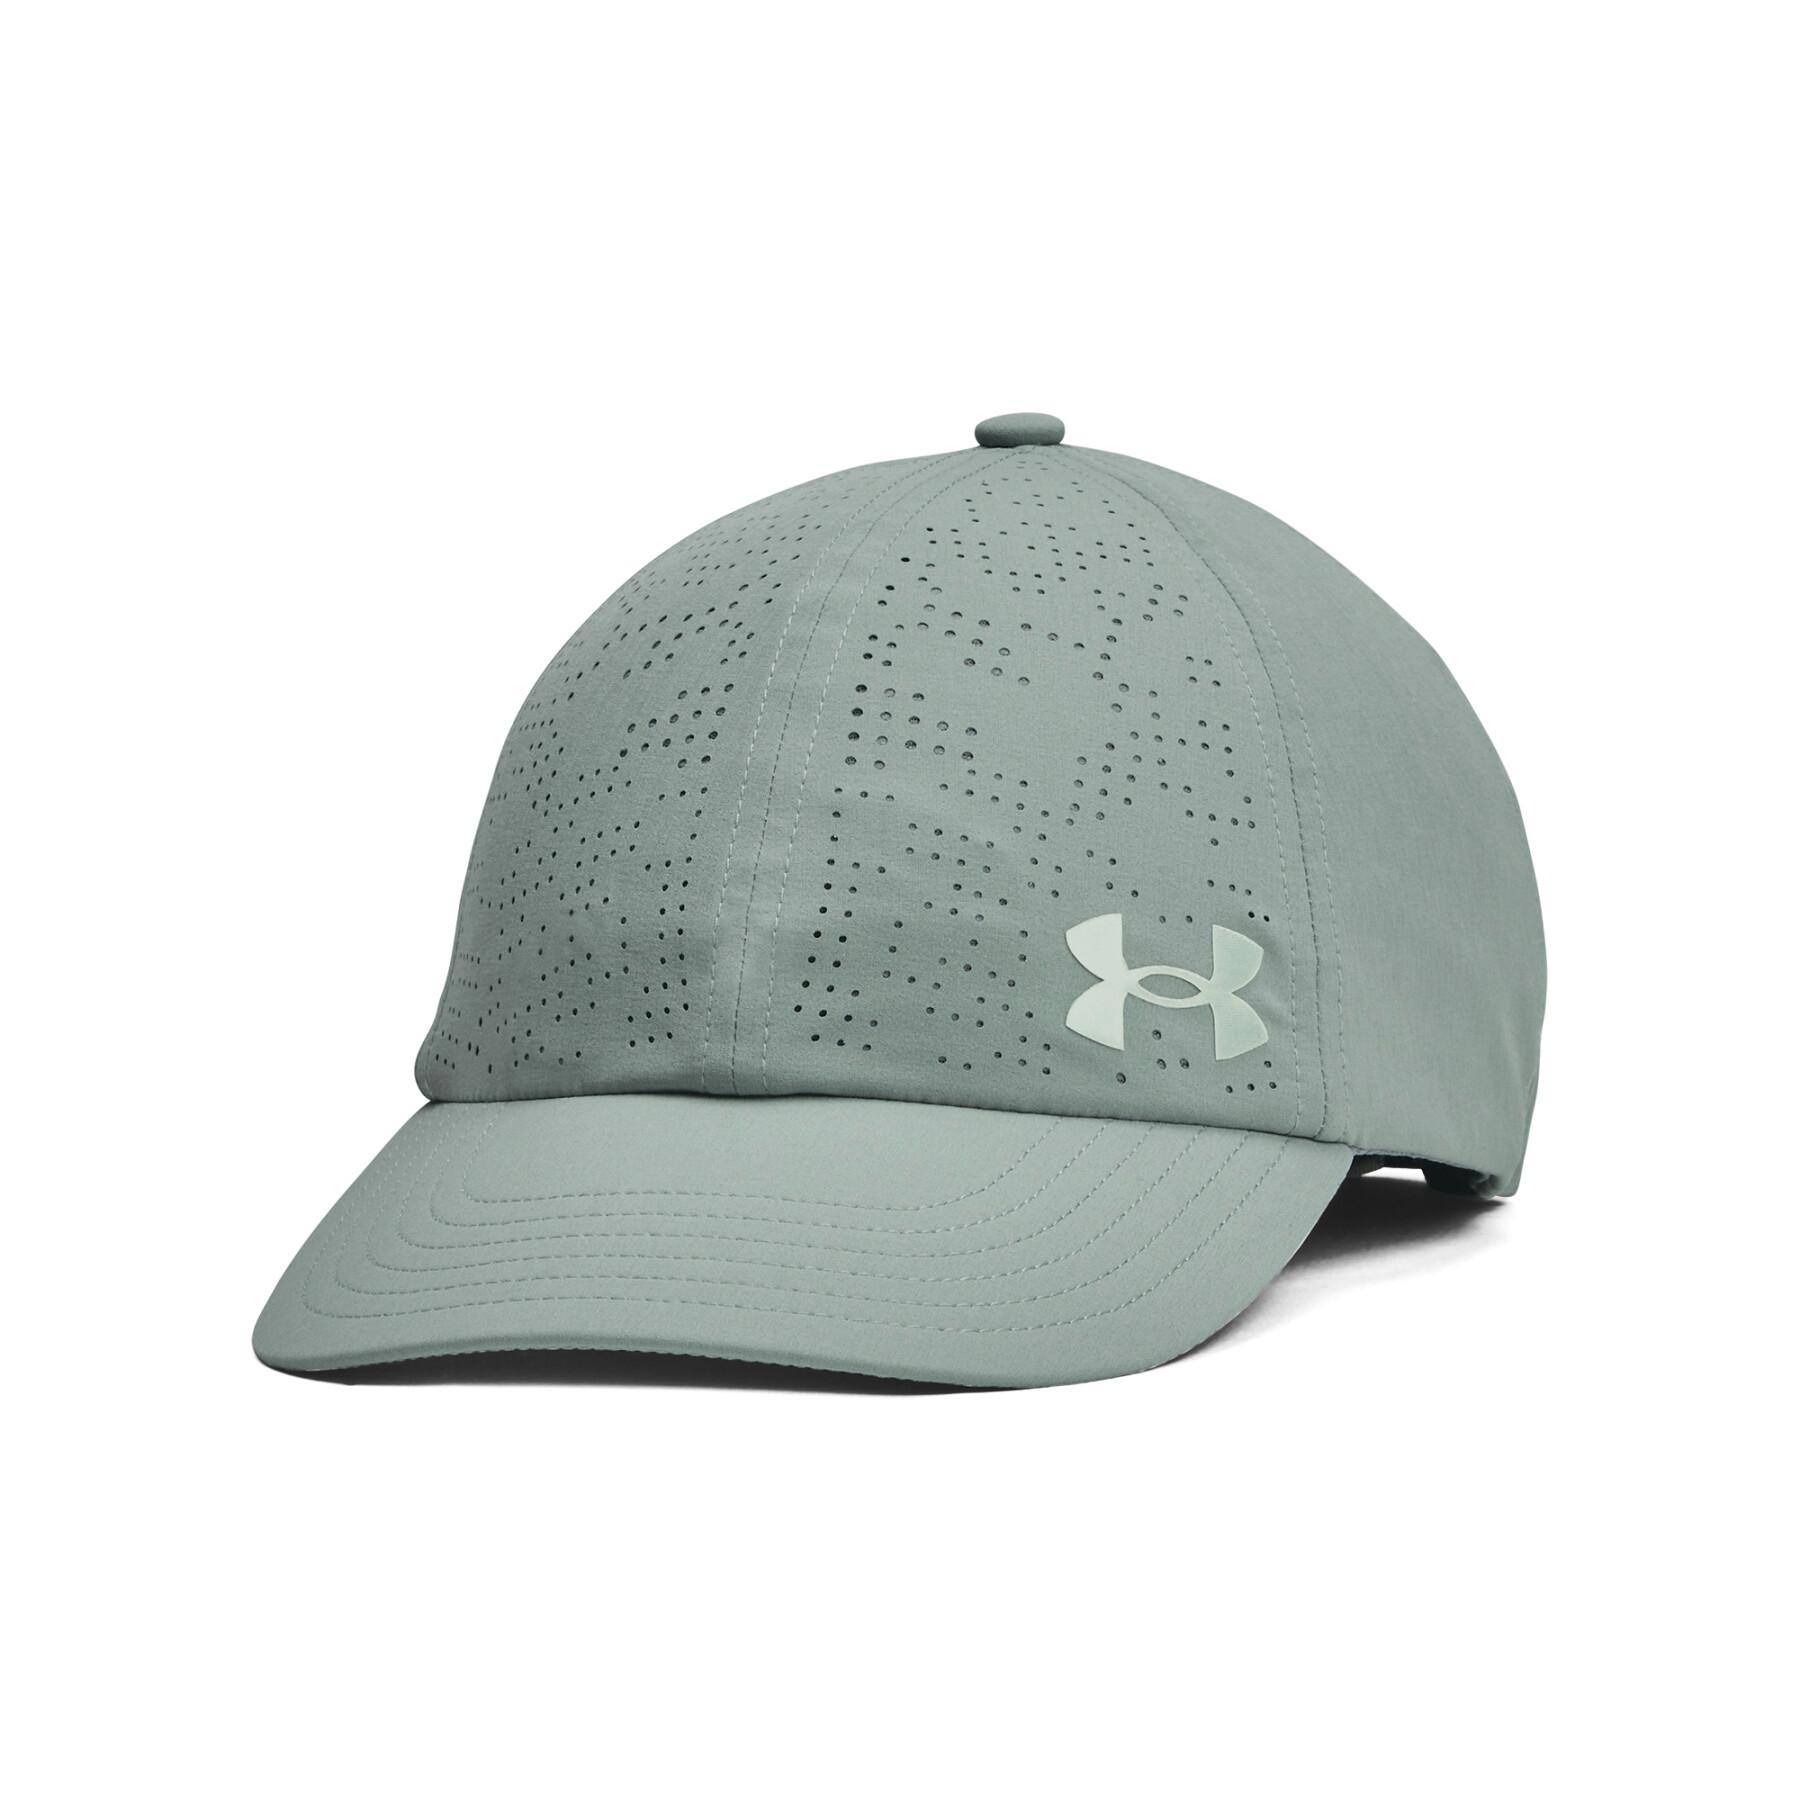 Gorra ajustable para mujer Under Armour Iso-chill breathe